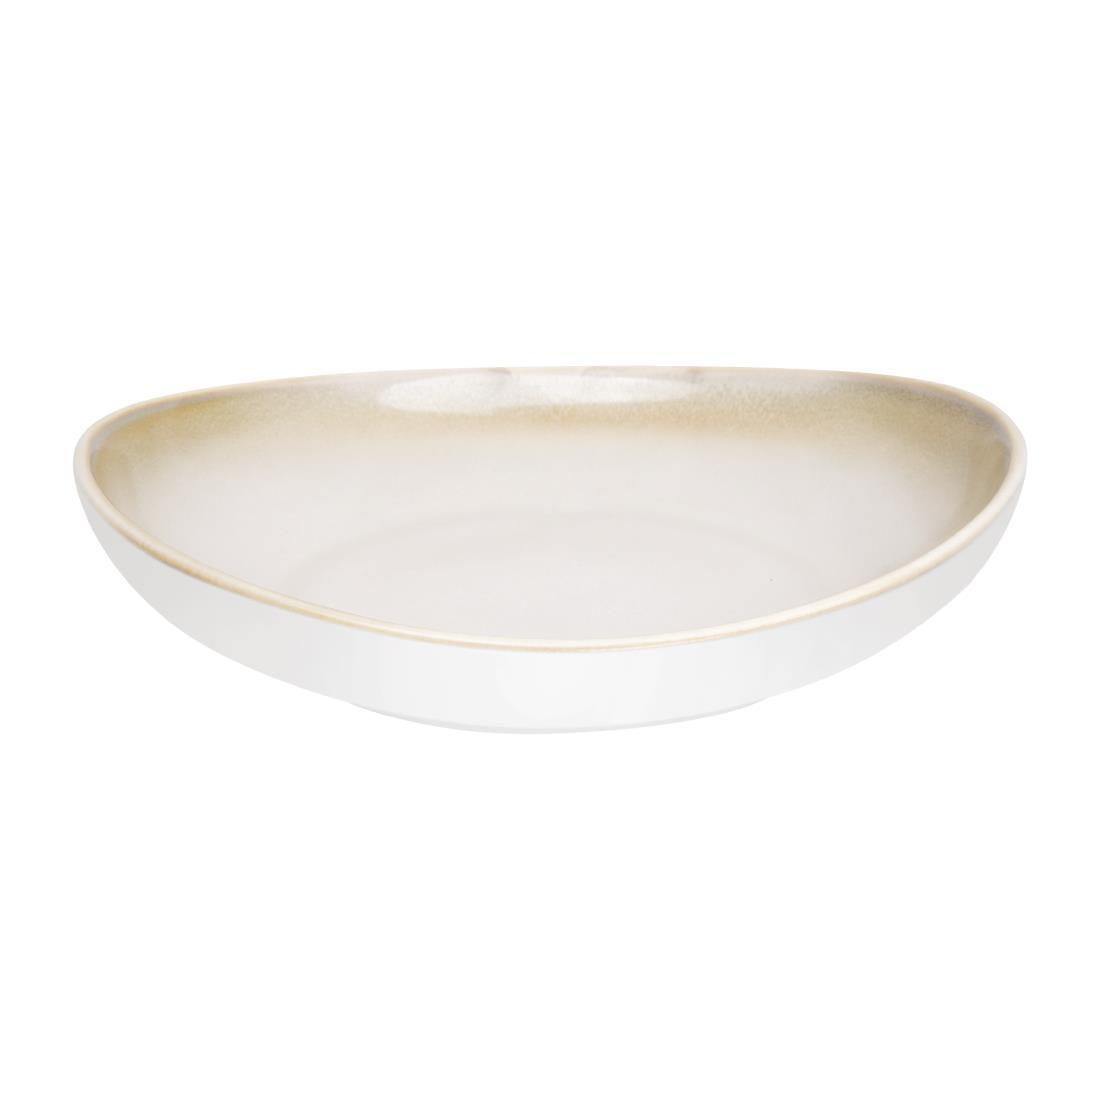 Olympia Birch Taupe Wide Bowls 208mm (Pack of 6) - DR784  - 1